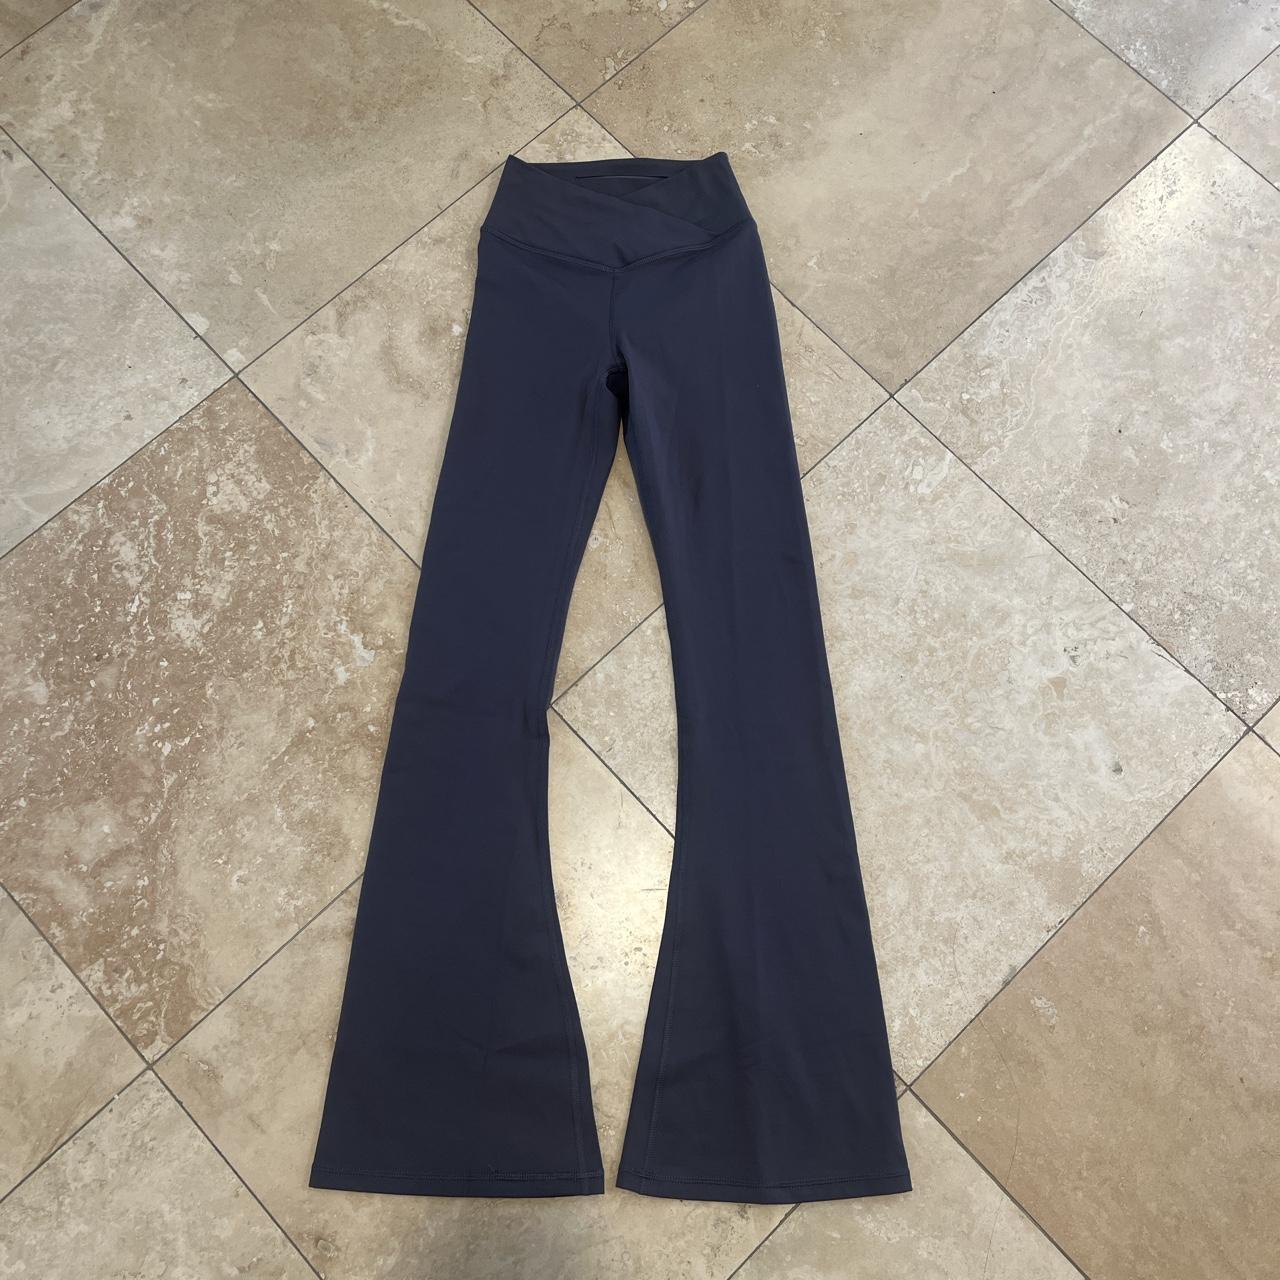 Mono B Crossover Waist Flare Leggings Color is a - Depop